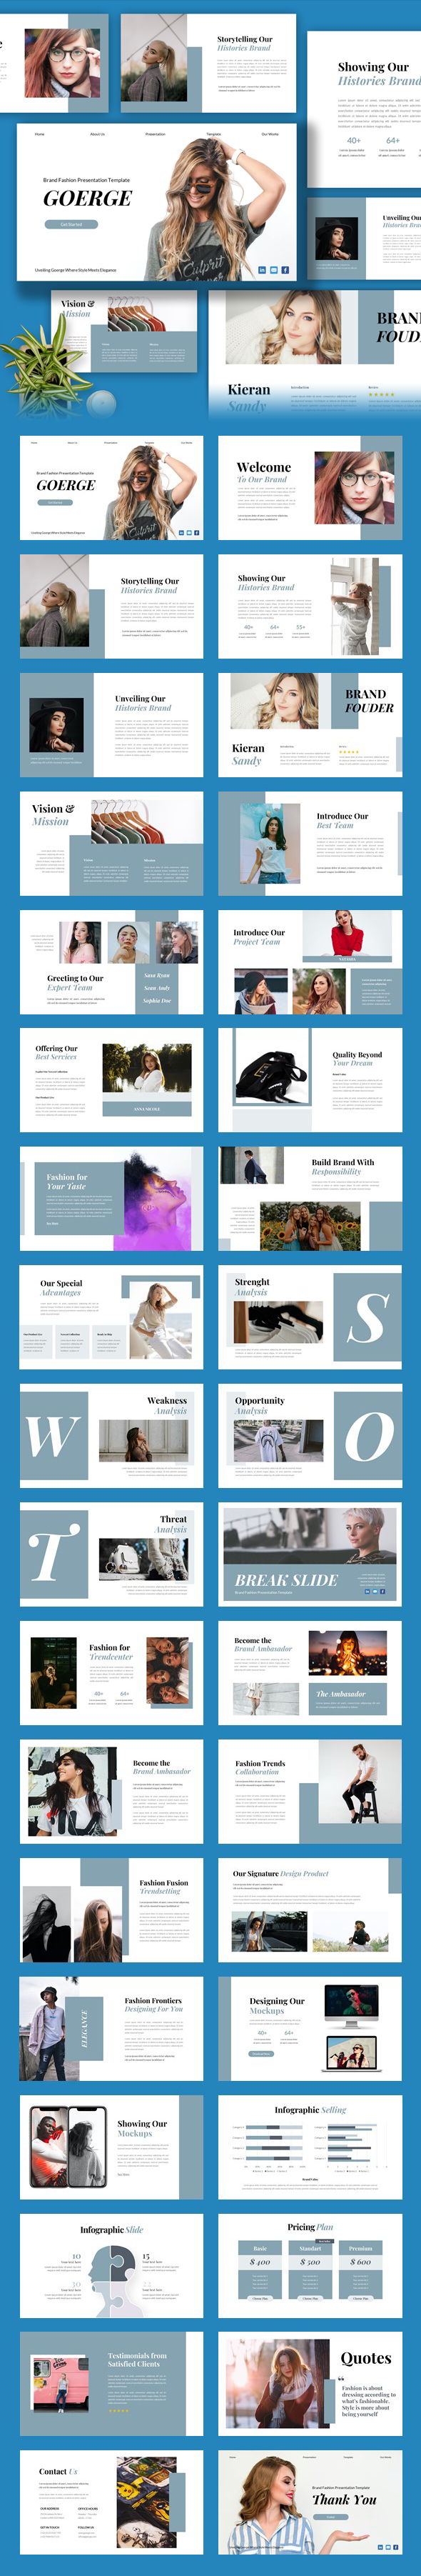 [DOWNLOAD]George - Brand Fashion PowerPoint Template